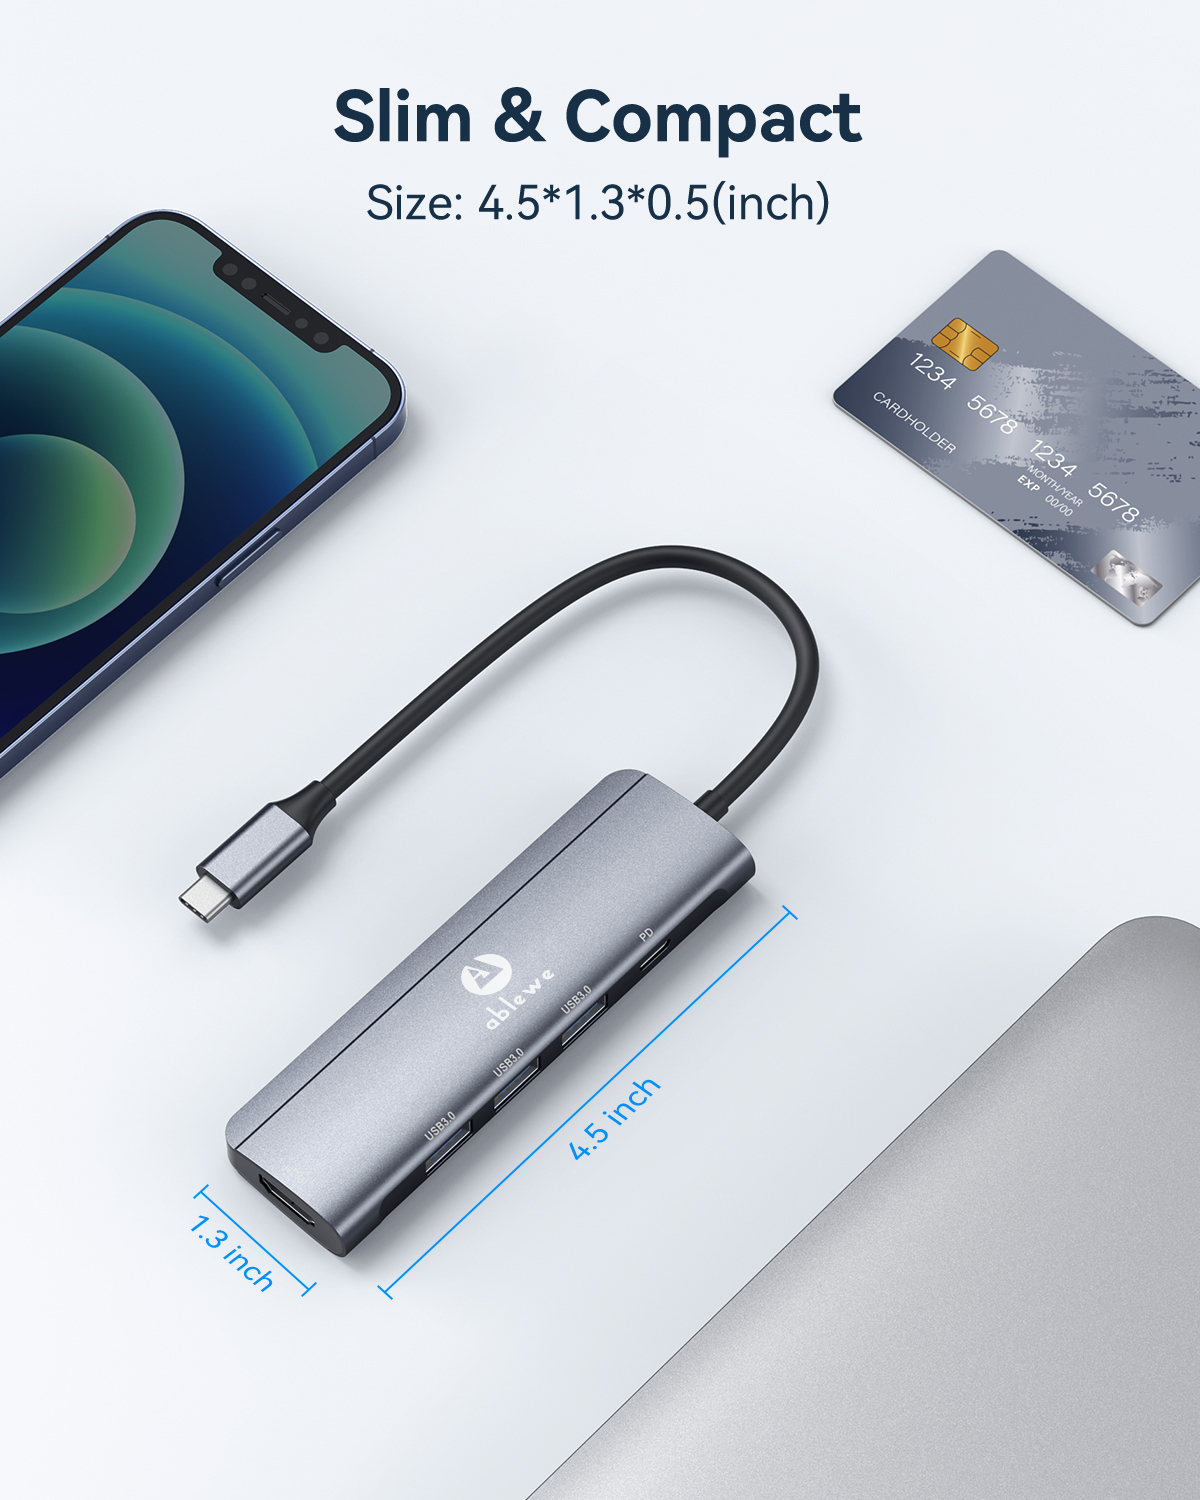 USB C Hub, ABLEWE USB C to HDMI Multiport Adapter, Thunderbolt 3 to HDMI Hub  with 4K HDMI, 3*USB 3.0 and 100W PD Charging Adapter for MacBook Pro/Air  2020, iPad Pro/Chromebook/Pixelbook/XPS/Surface